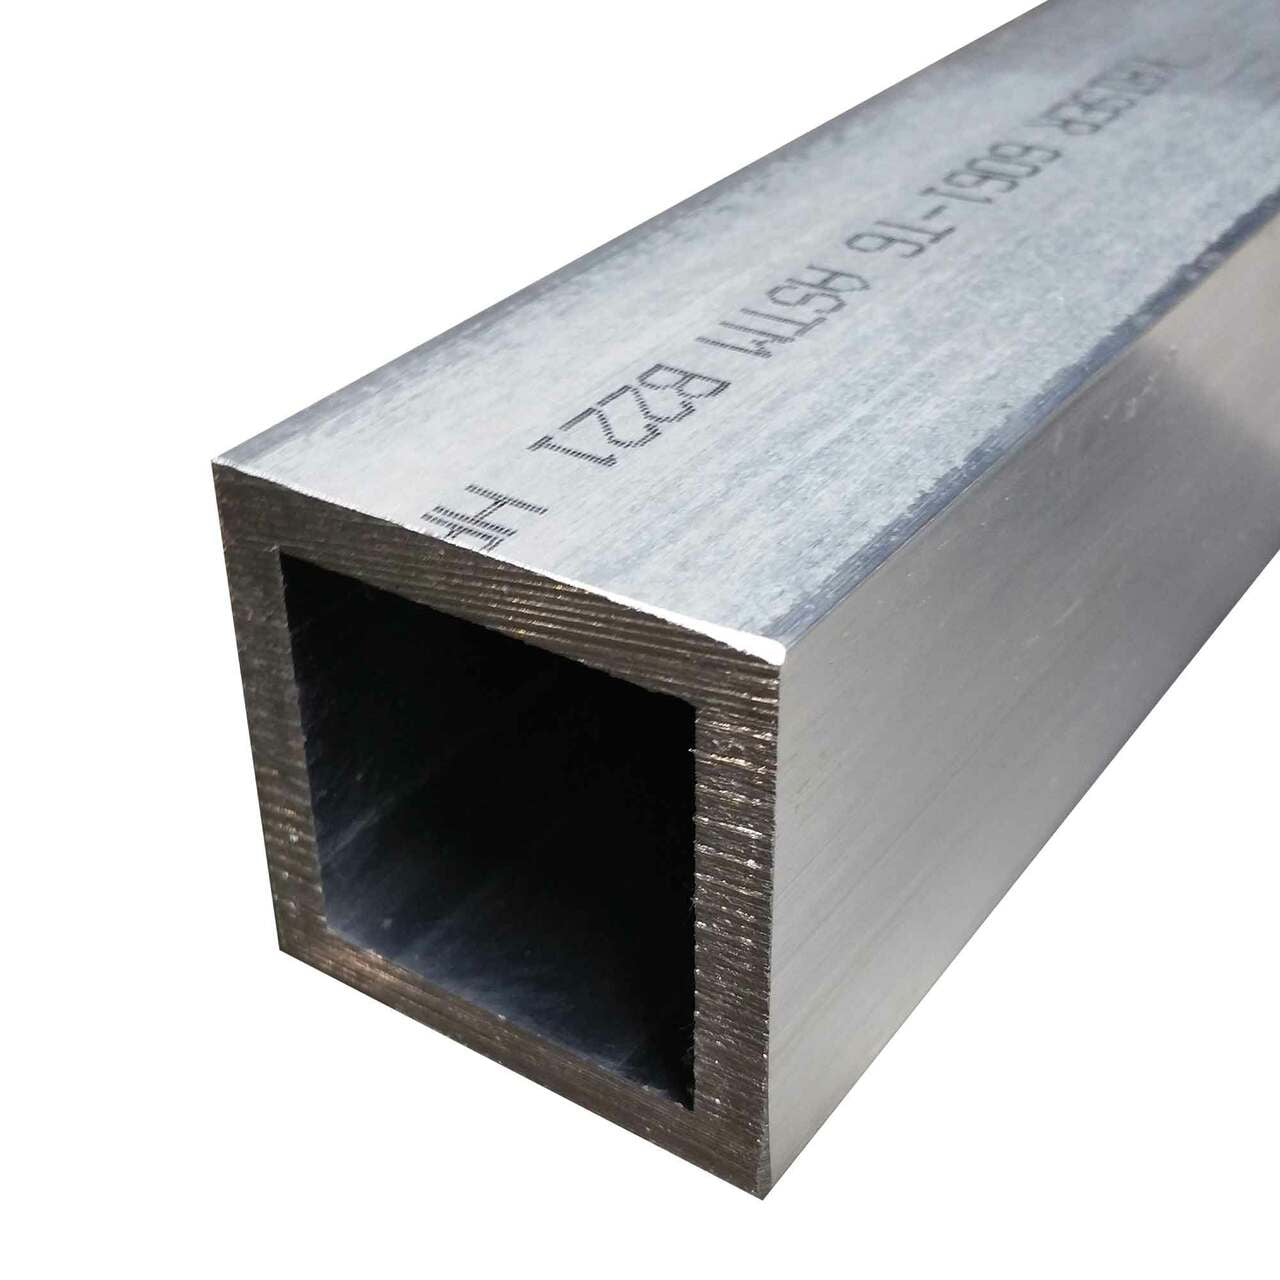 Buy 2 X 2 X 0188 W X 21 Inches 6061 T6 Aluminum Square Tube Online At